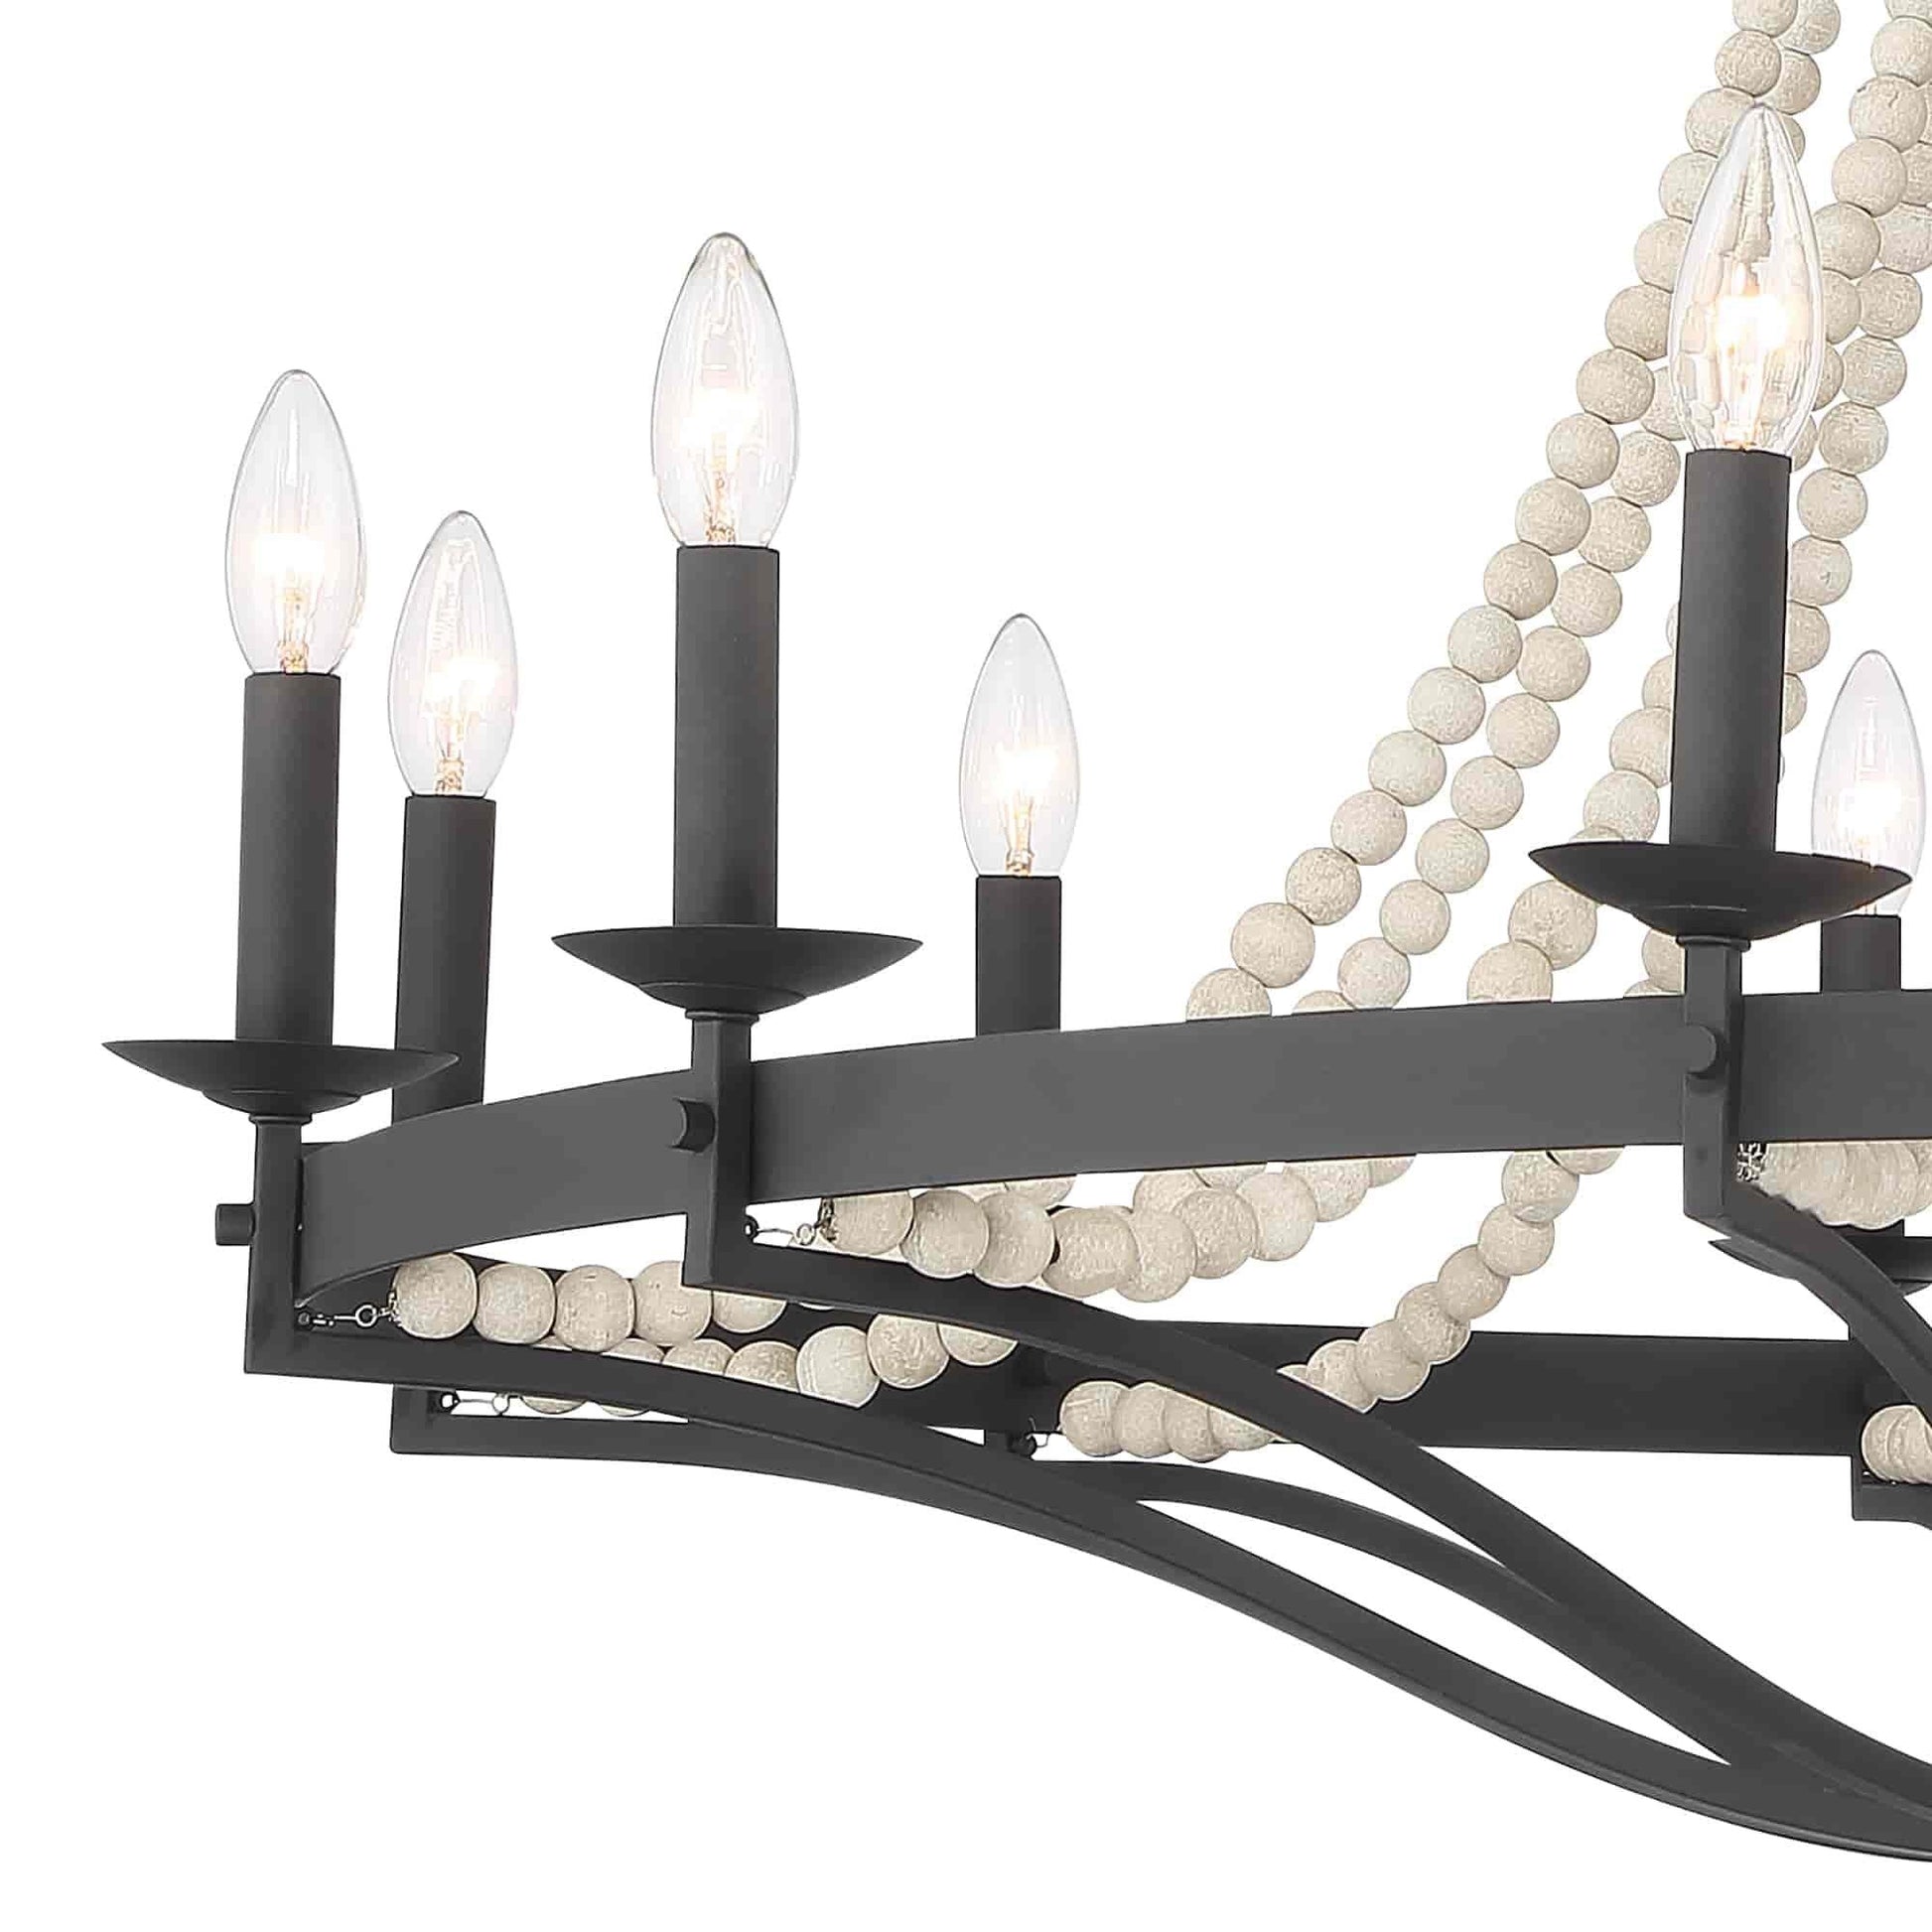 12 light candle style wagon wheel chandelier with beaded accents (6) by ACROMA